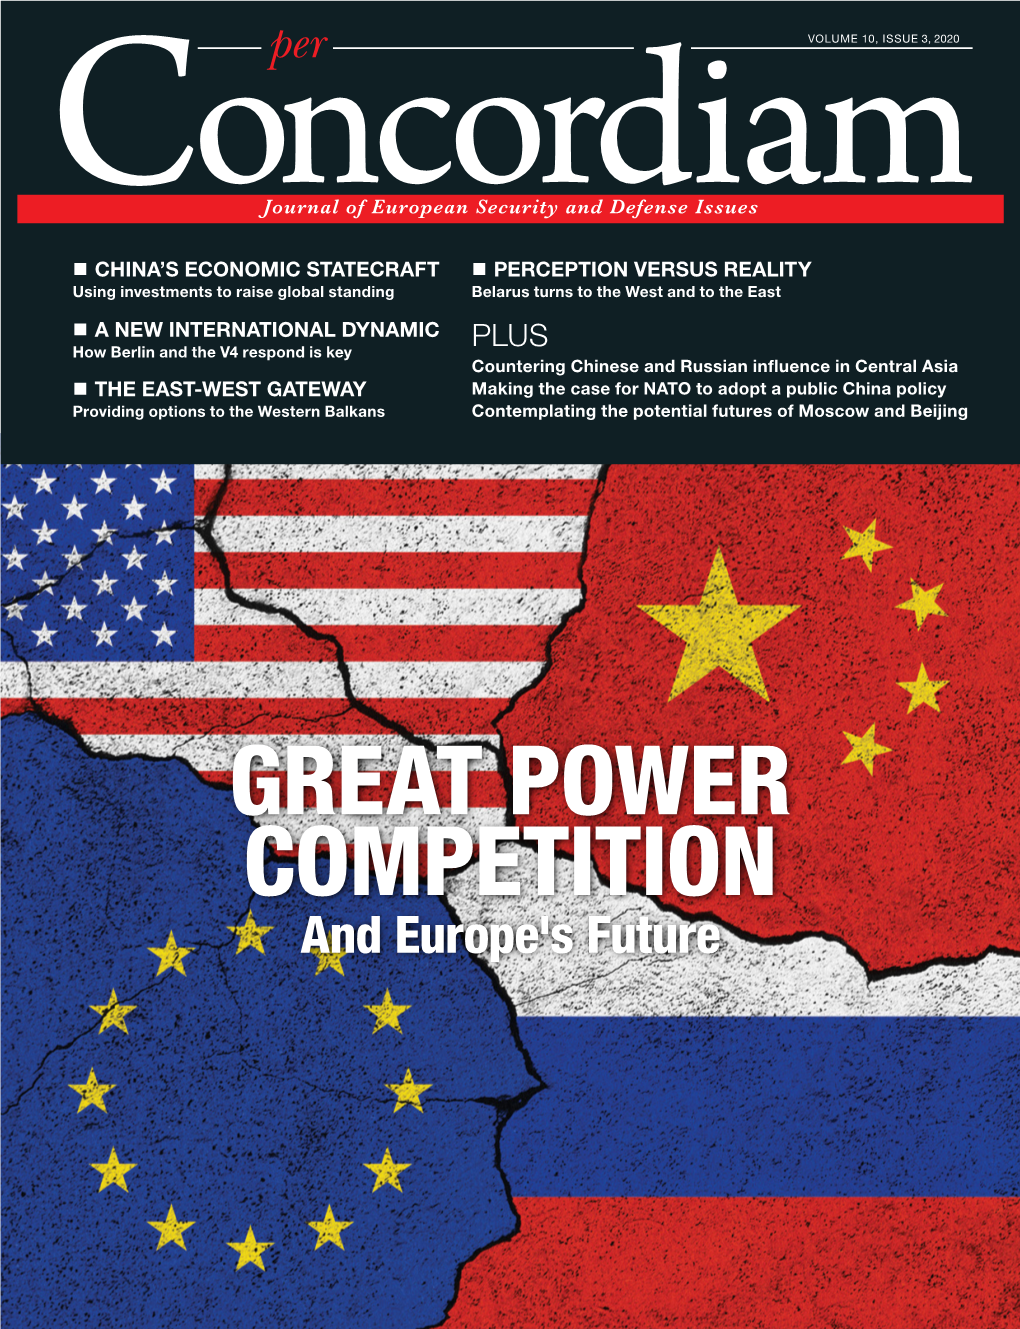 GREAT POWER COMPETITION and Europe's Future TABLE of CONTENTS Features